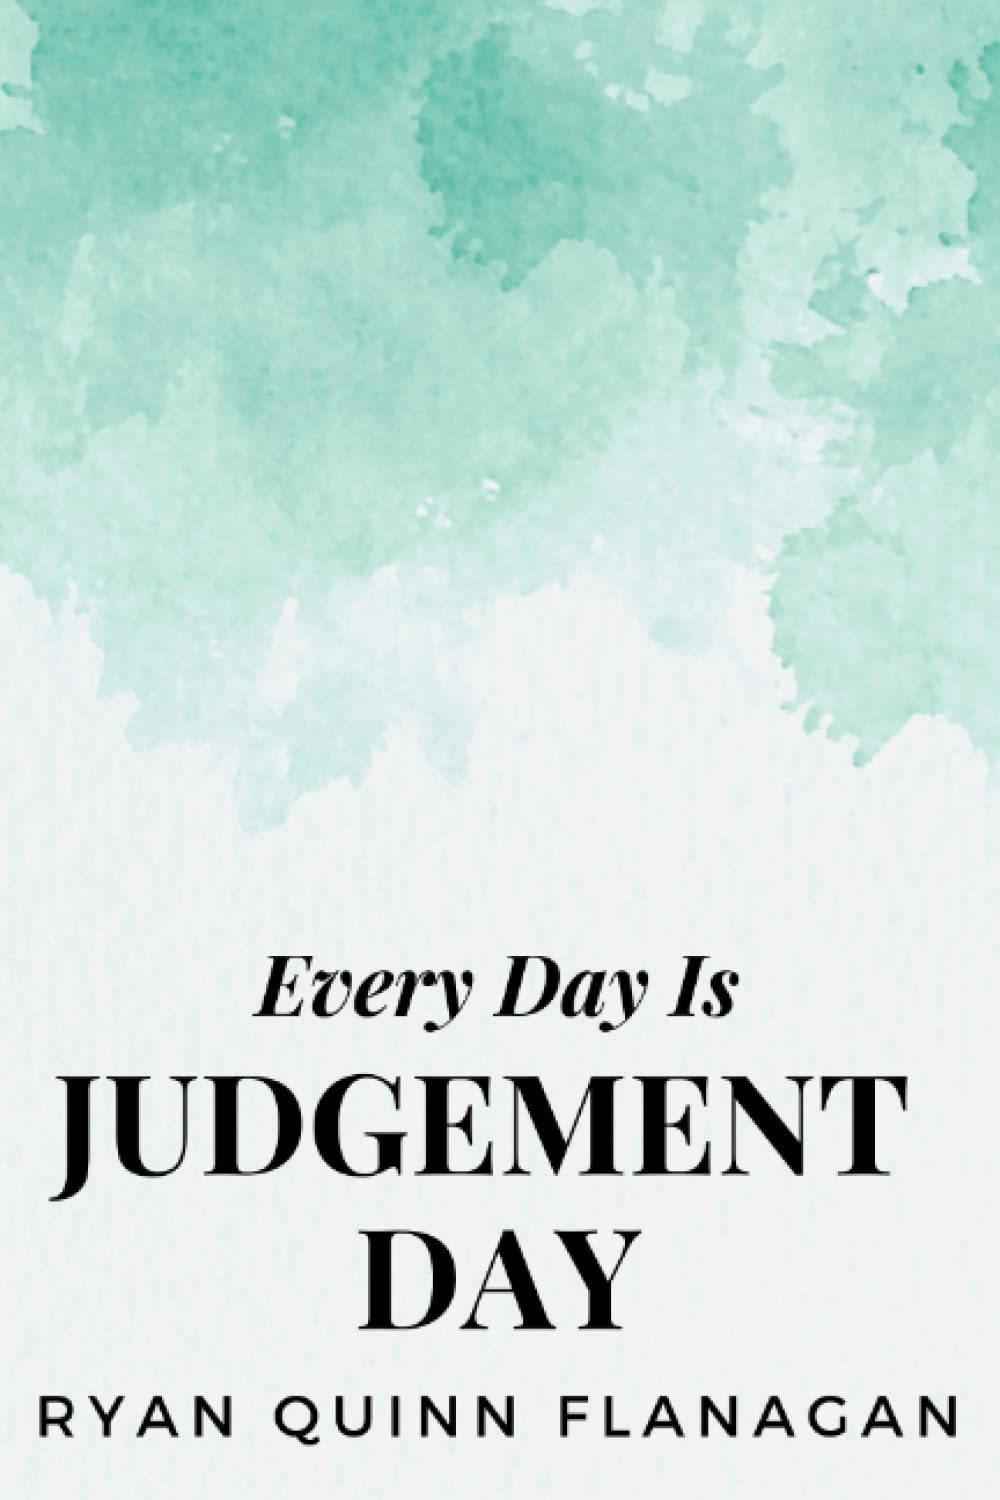 Every Day Is Judgement Day